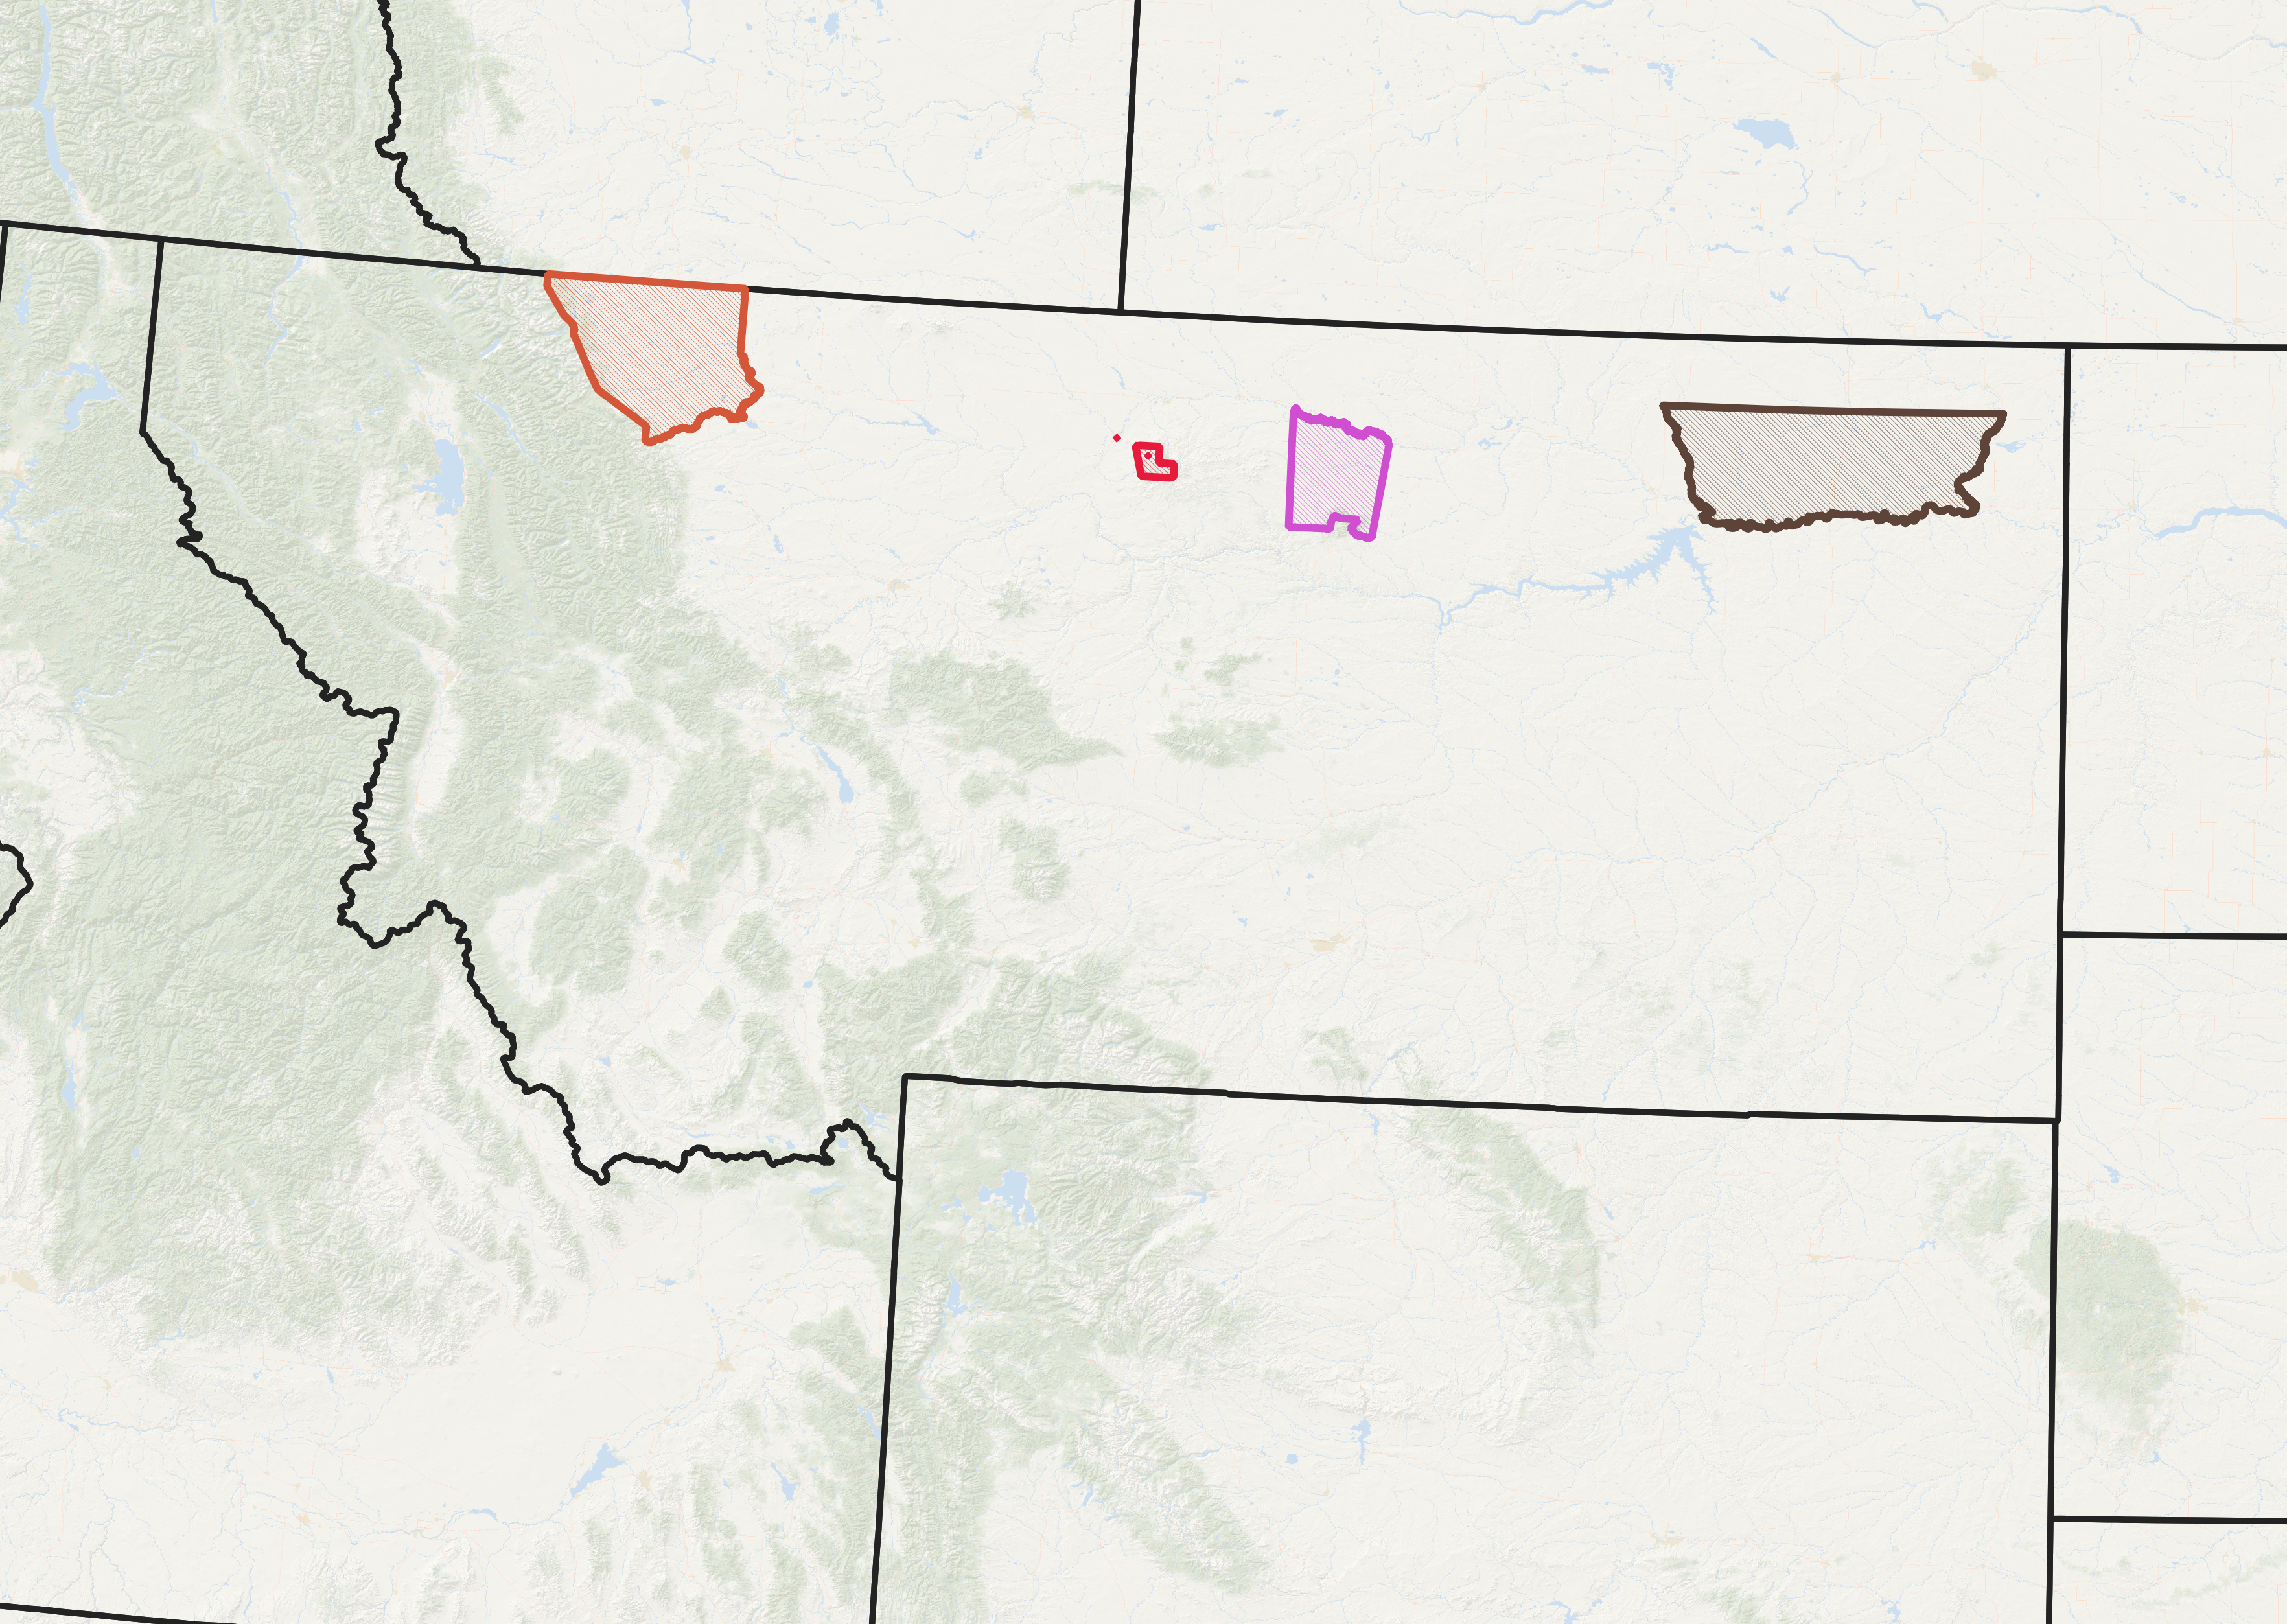 Image shows the locations of the Blackfeet (in orange), Rocky Boy's (red), Fort Belknap (purple), and Fort Peck (brown) Indian communities within Montana. 